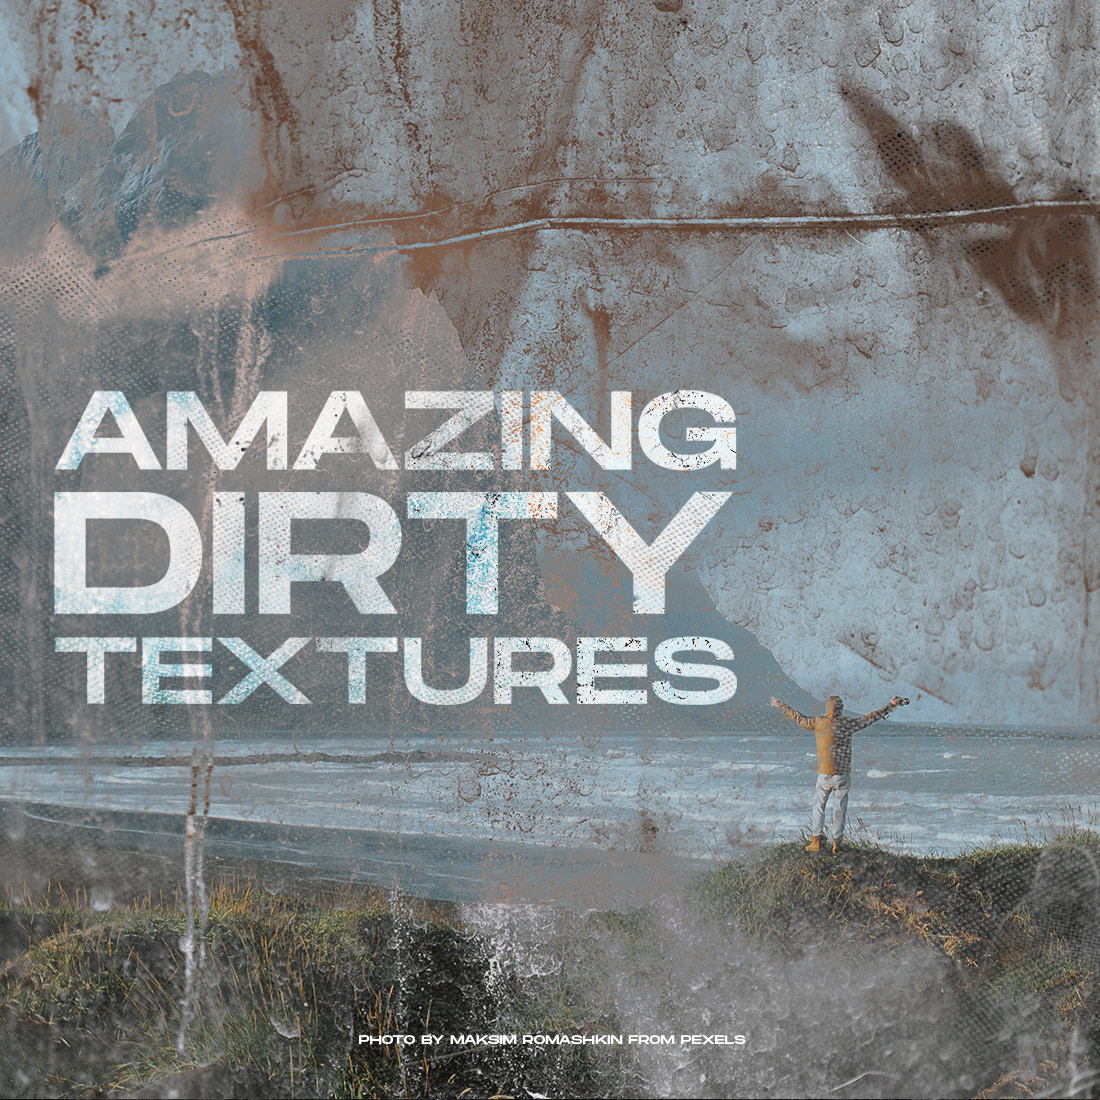 Amazing Dirty Old Style Textures cover image.